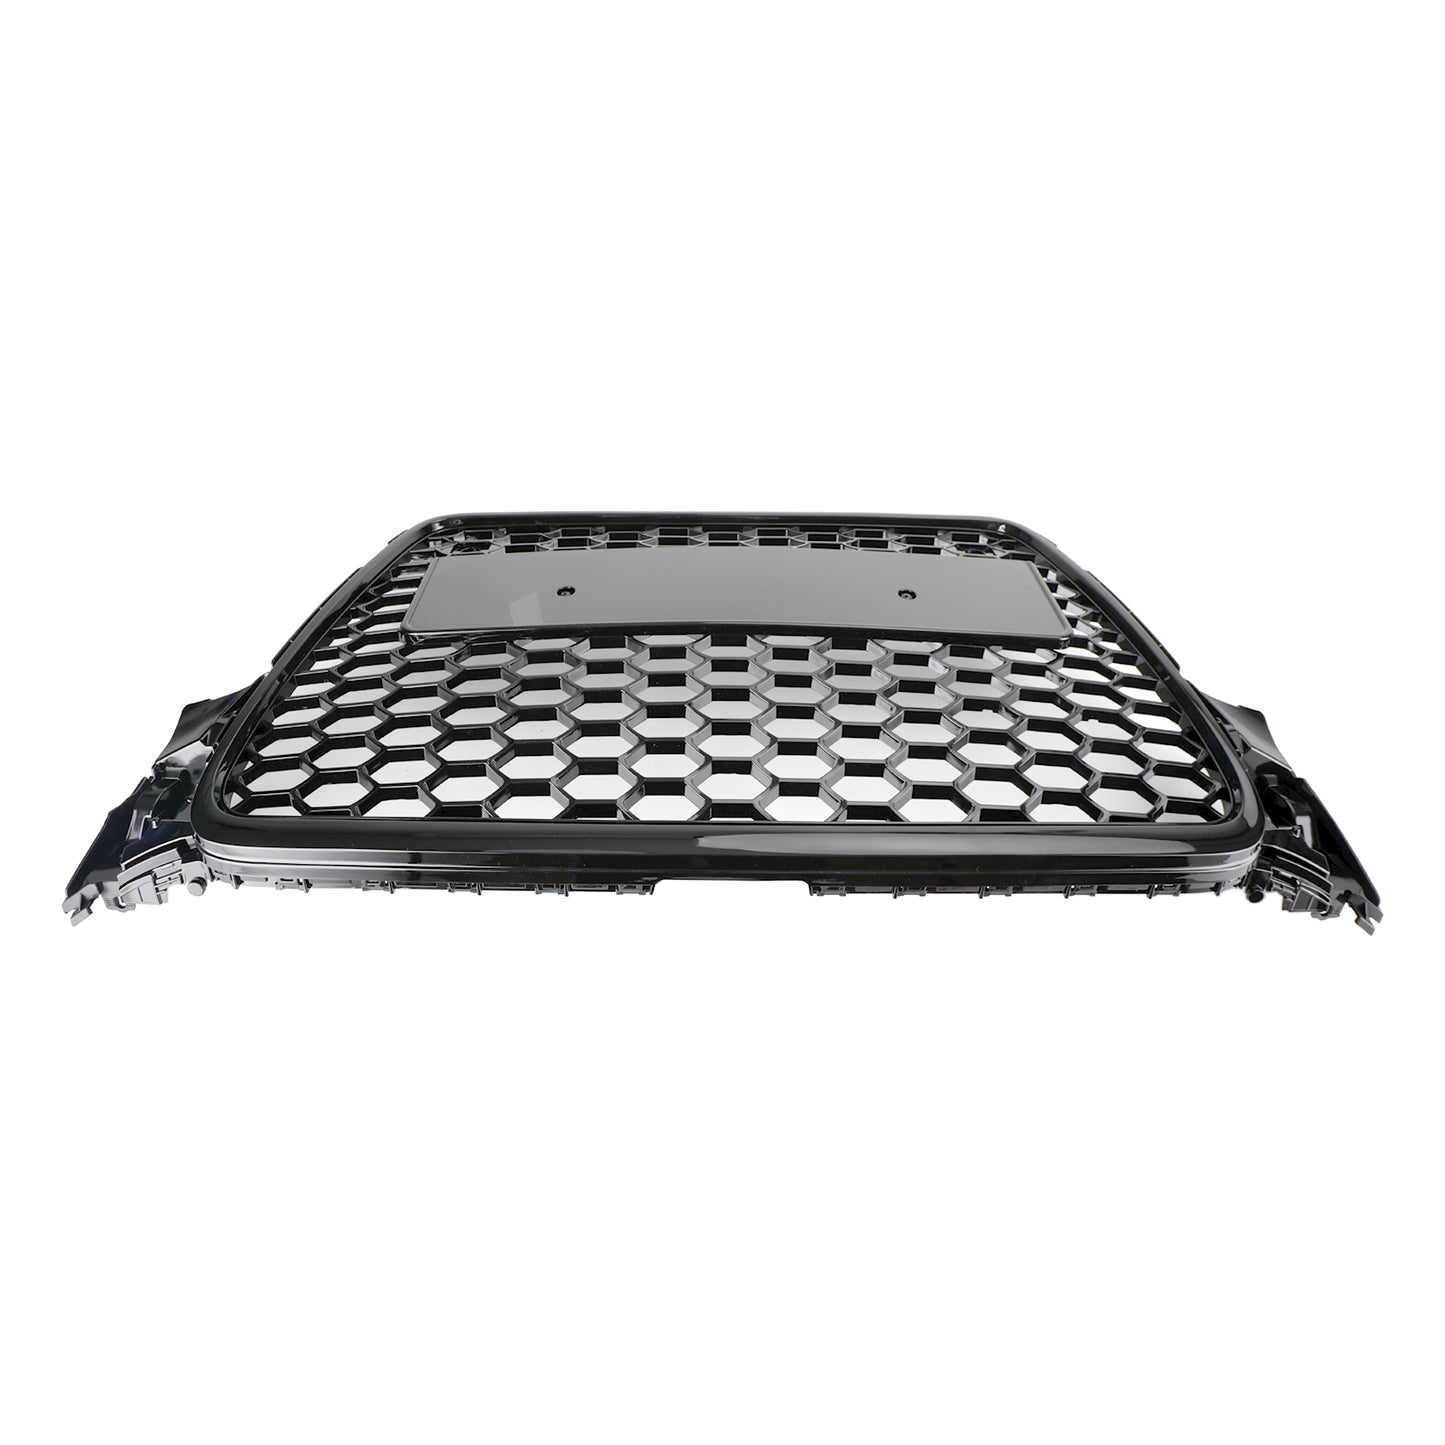 RS4 Style Honeycomb Sport Mesh Hex Grille Grill Fit Audi A4/S4 B8 2009-2012